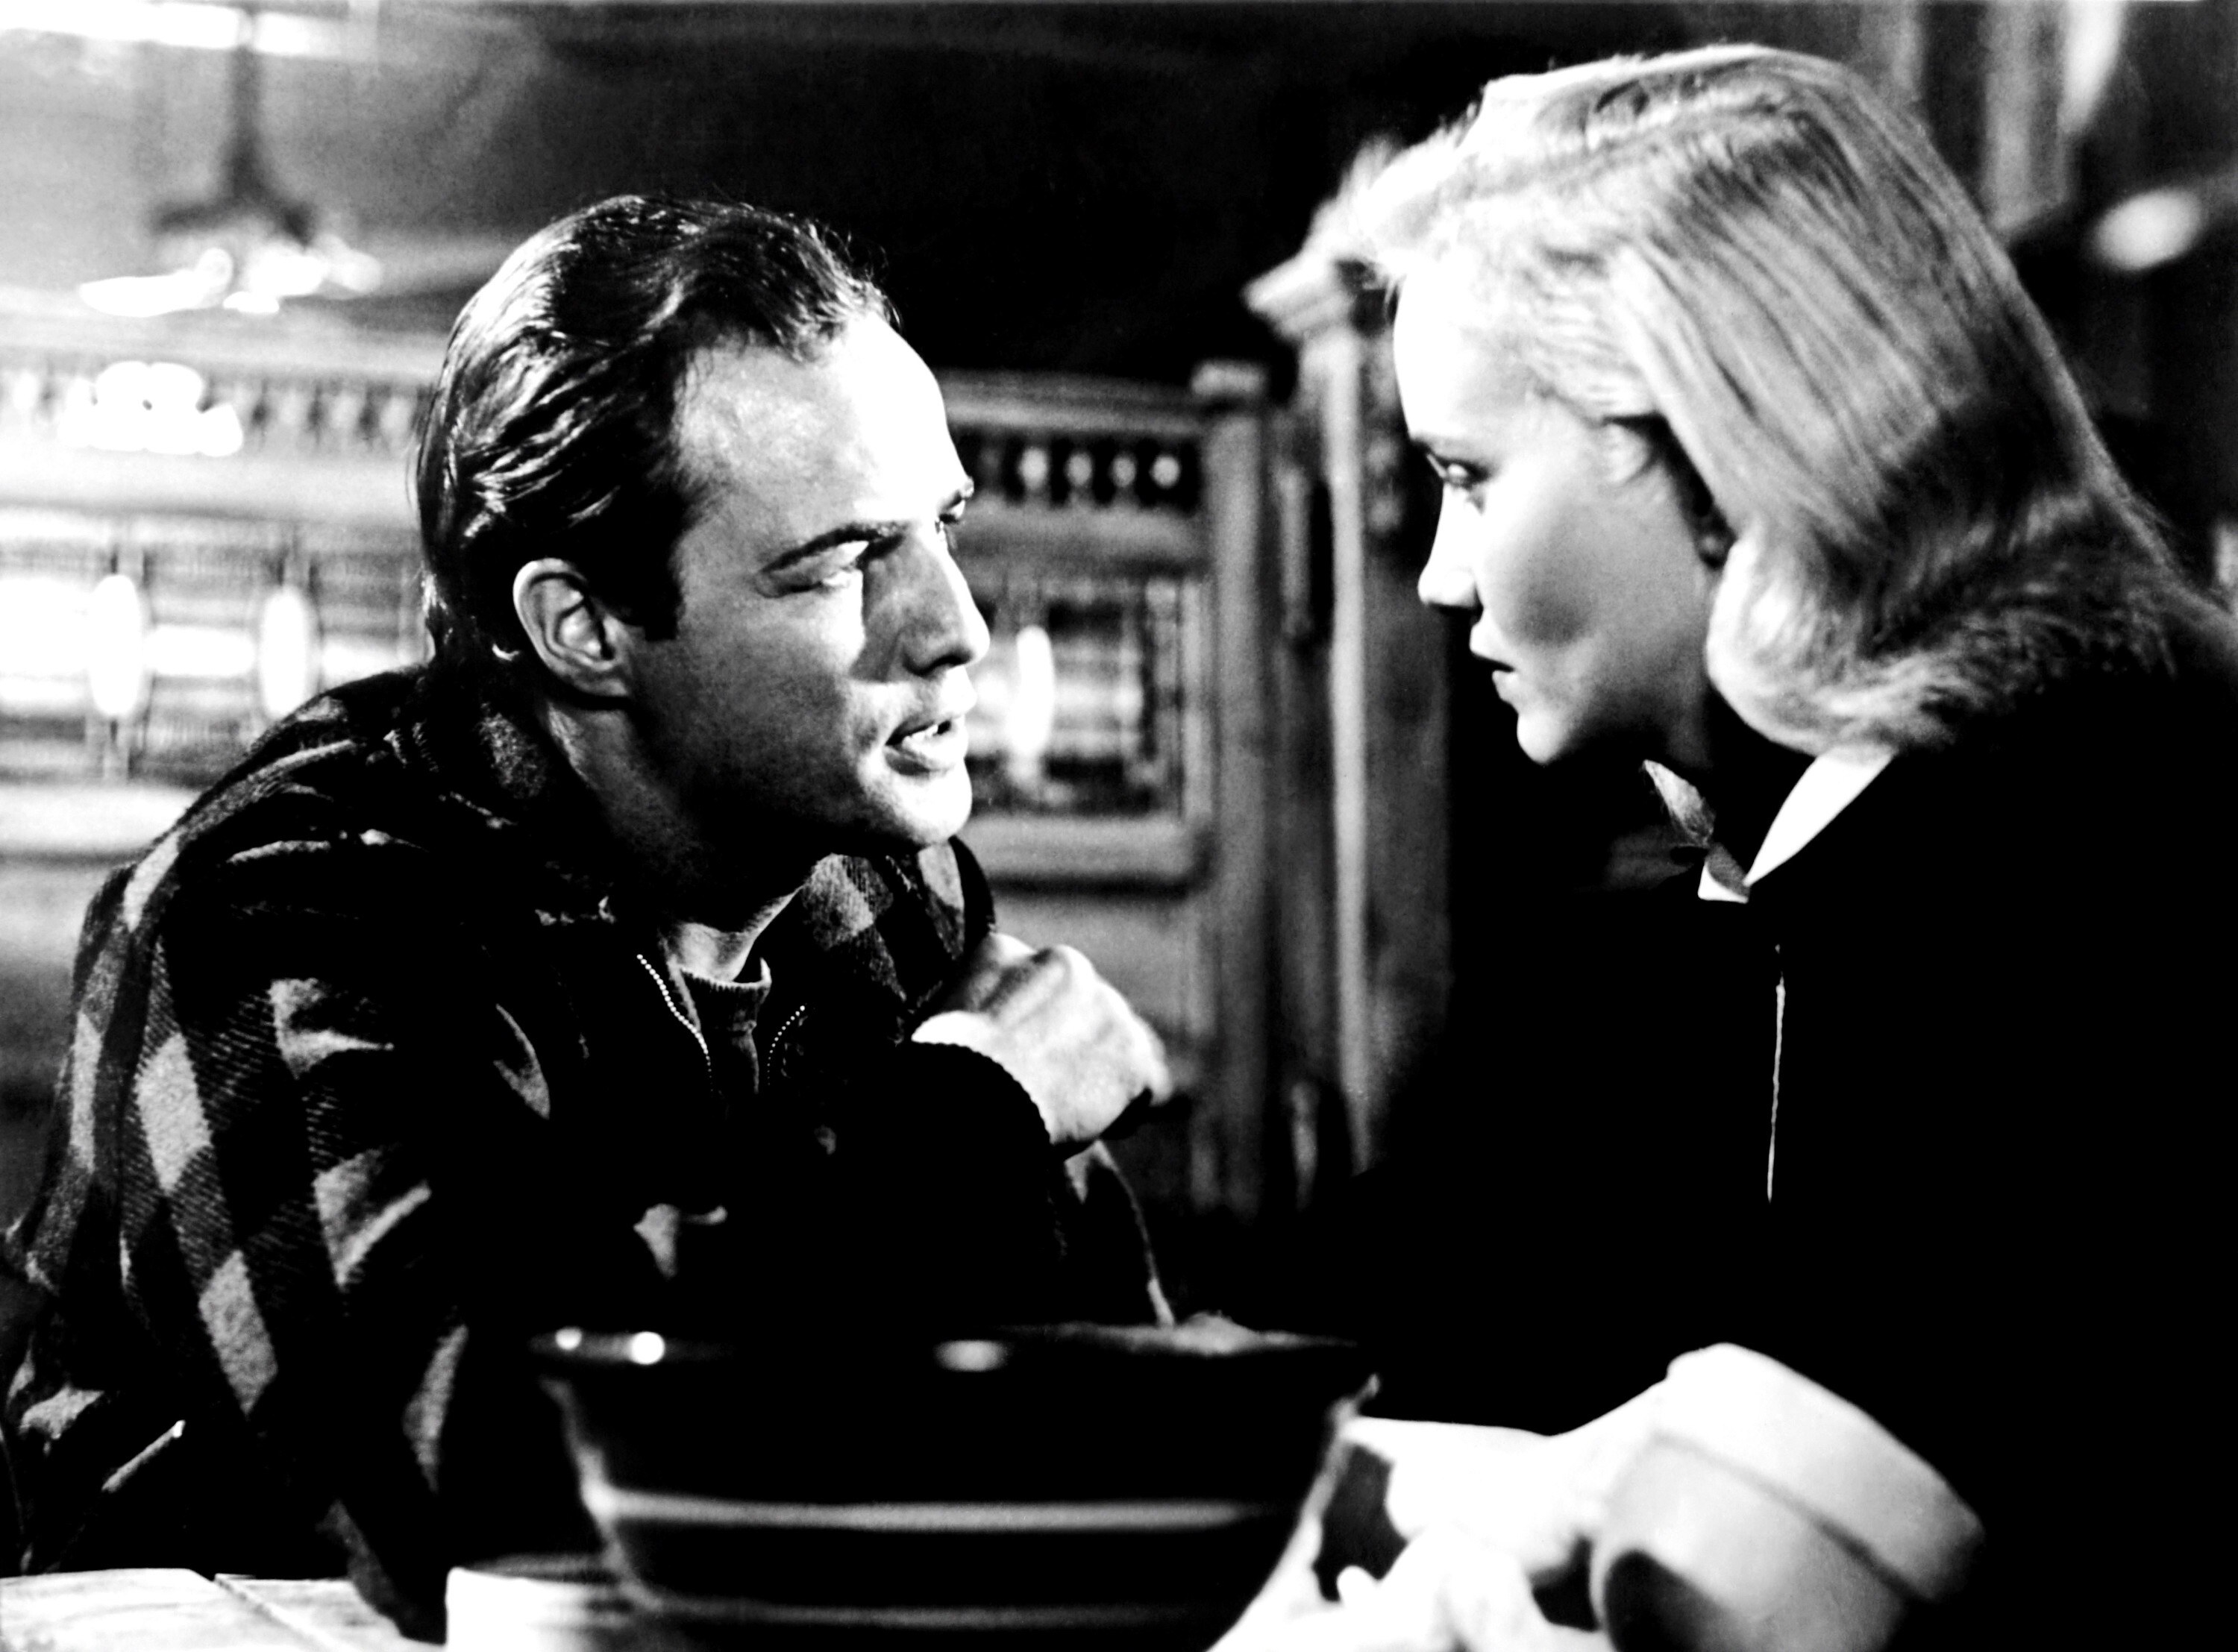 Marlon Brando and Eva Marie Saint looking at each other intensely